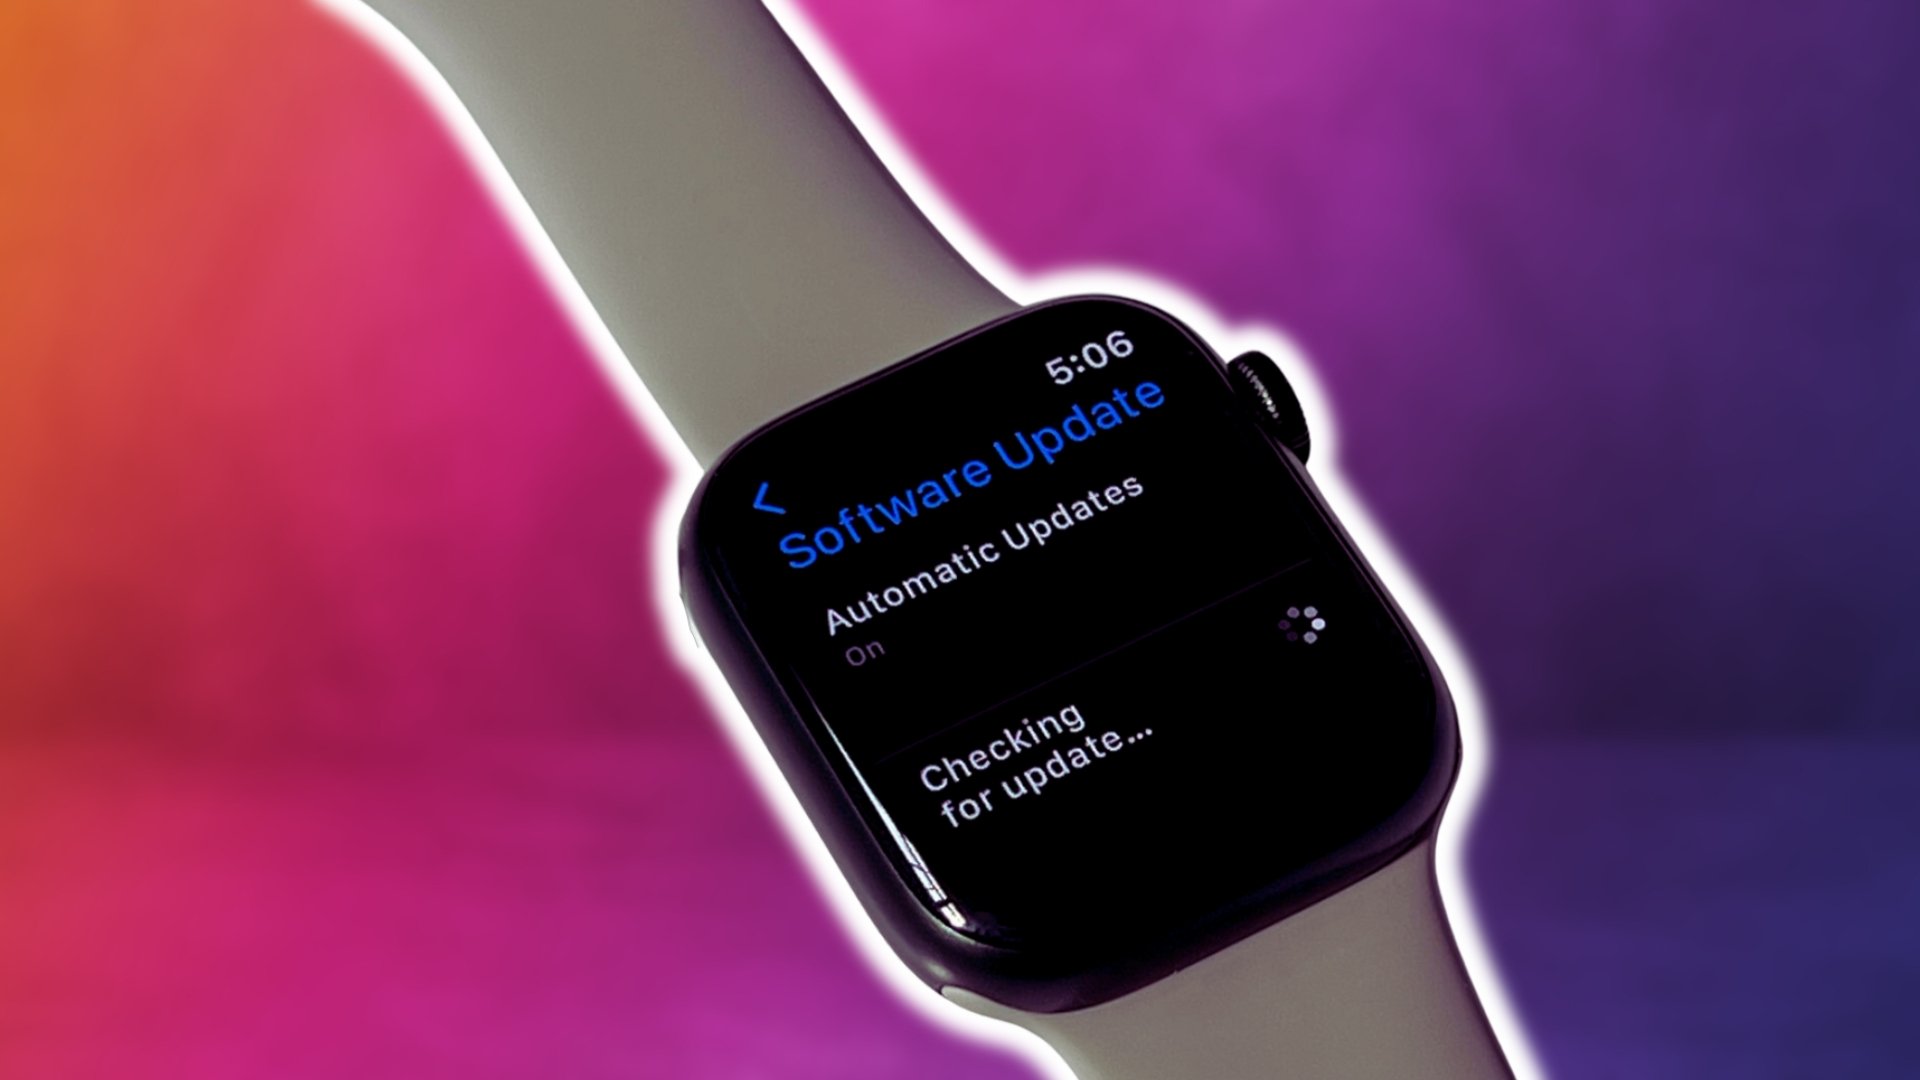 Update to the Latest watchOS Software